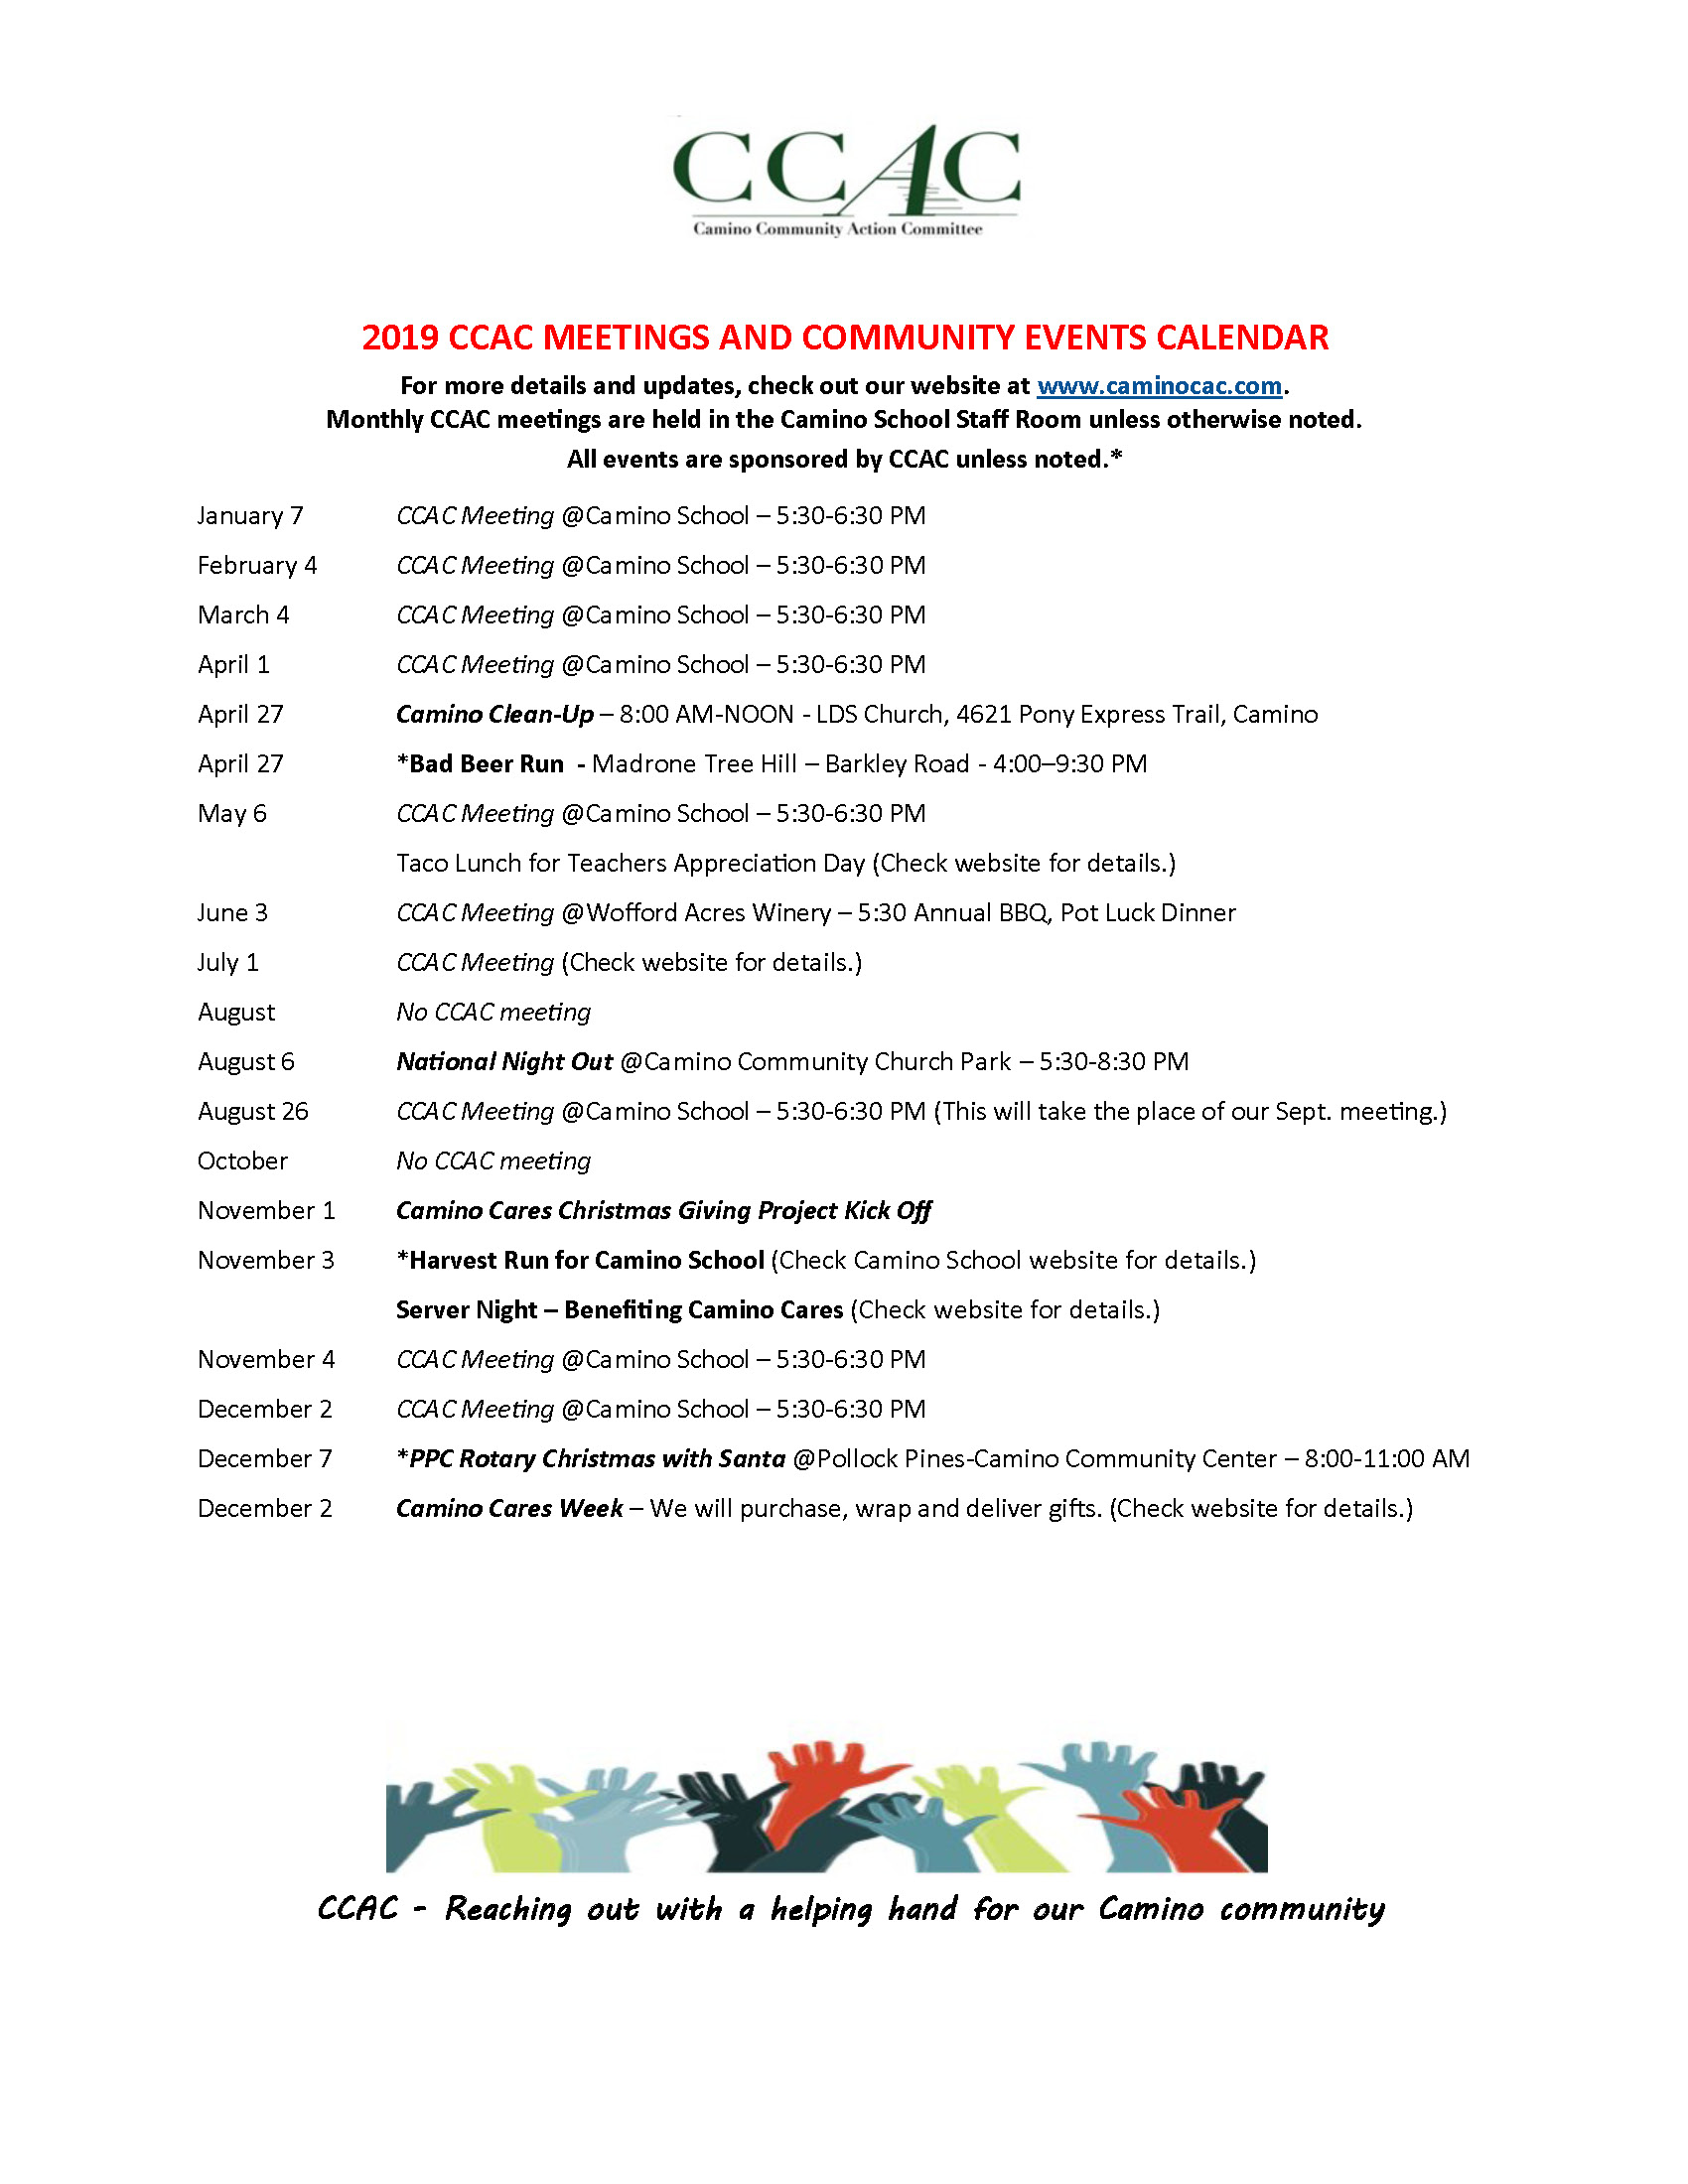 CCAC Calendar 2019 CCAC Working Together for Camino